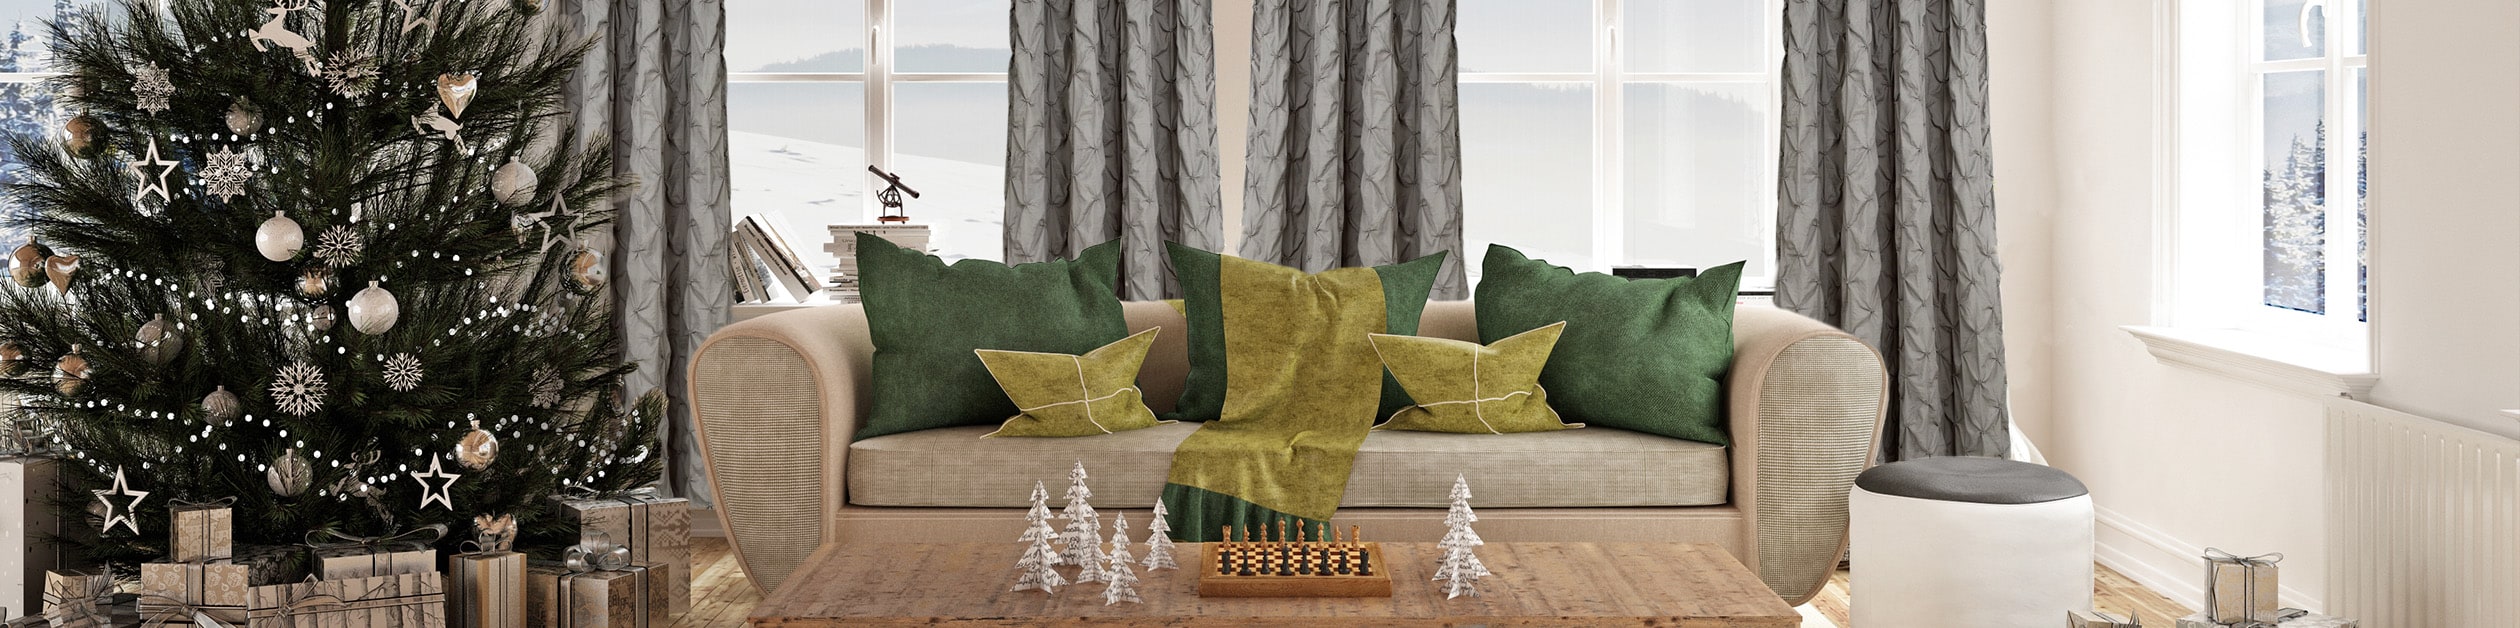 Spruce Up Your Window Treatments for the Holidays